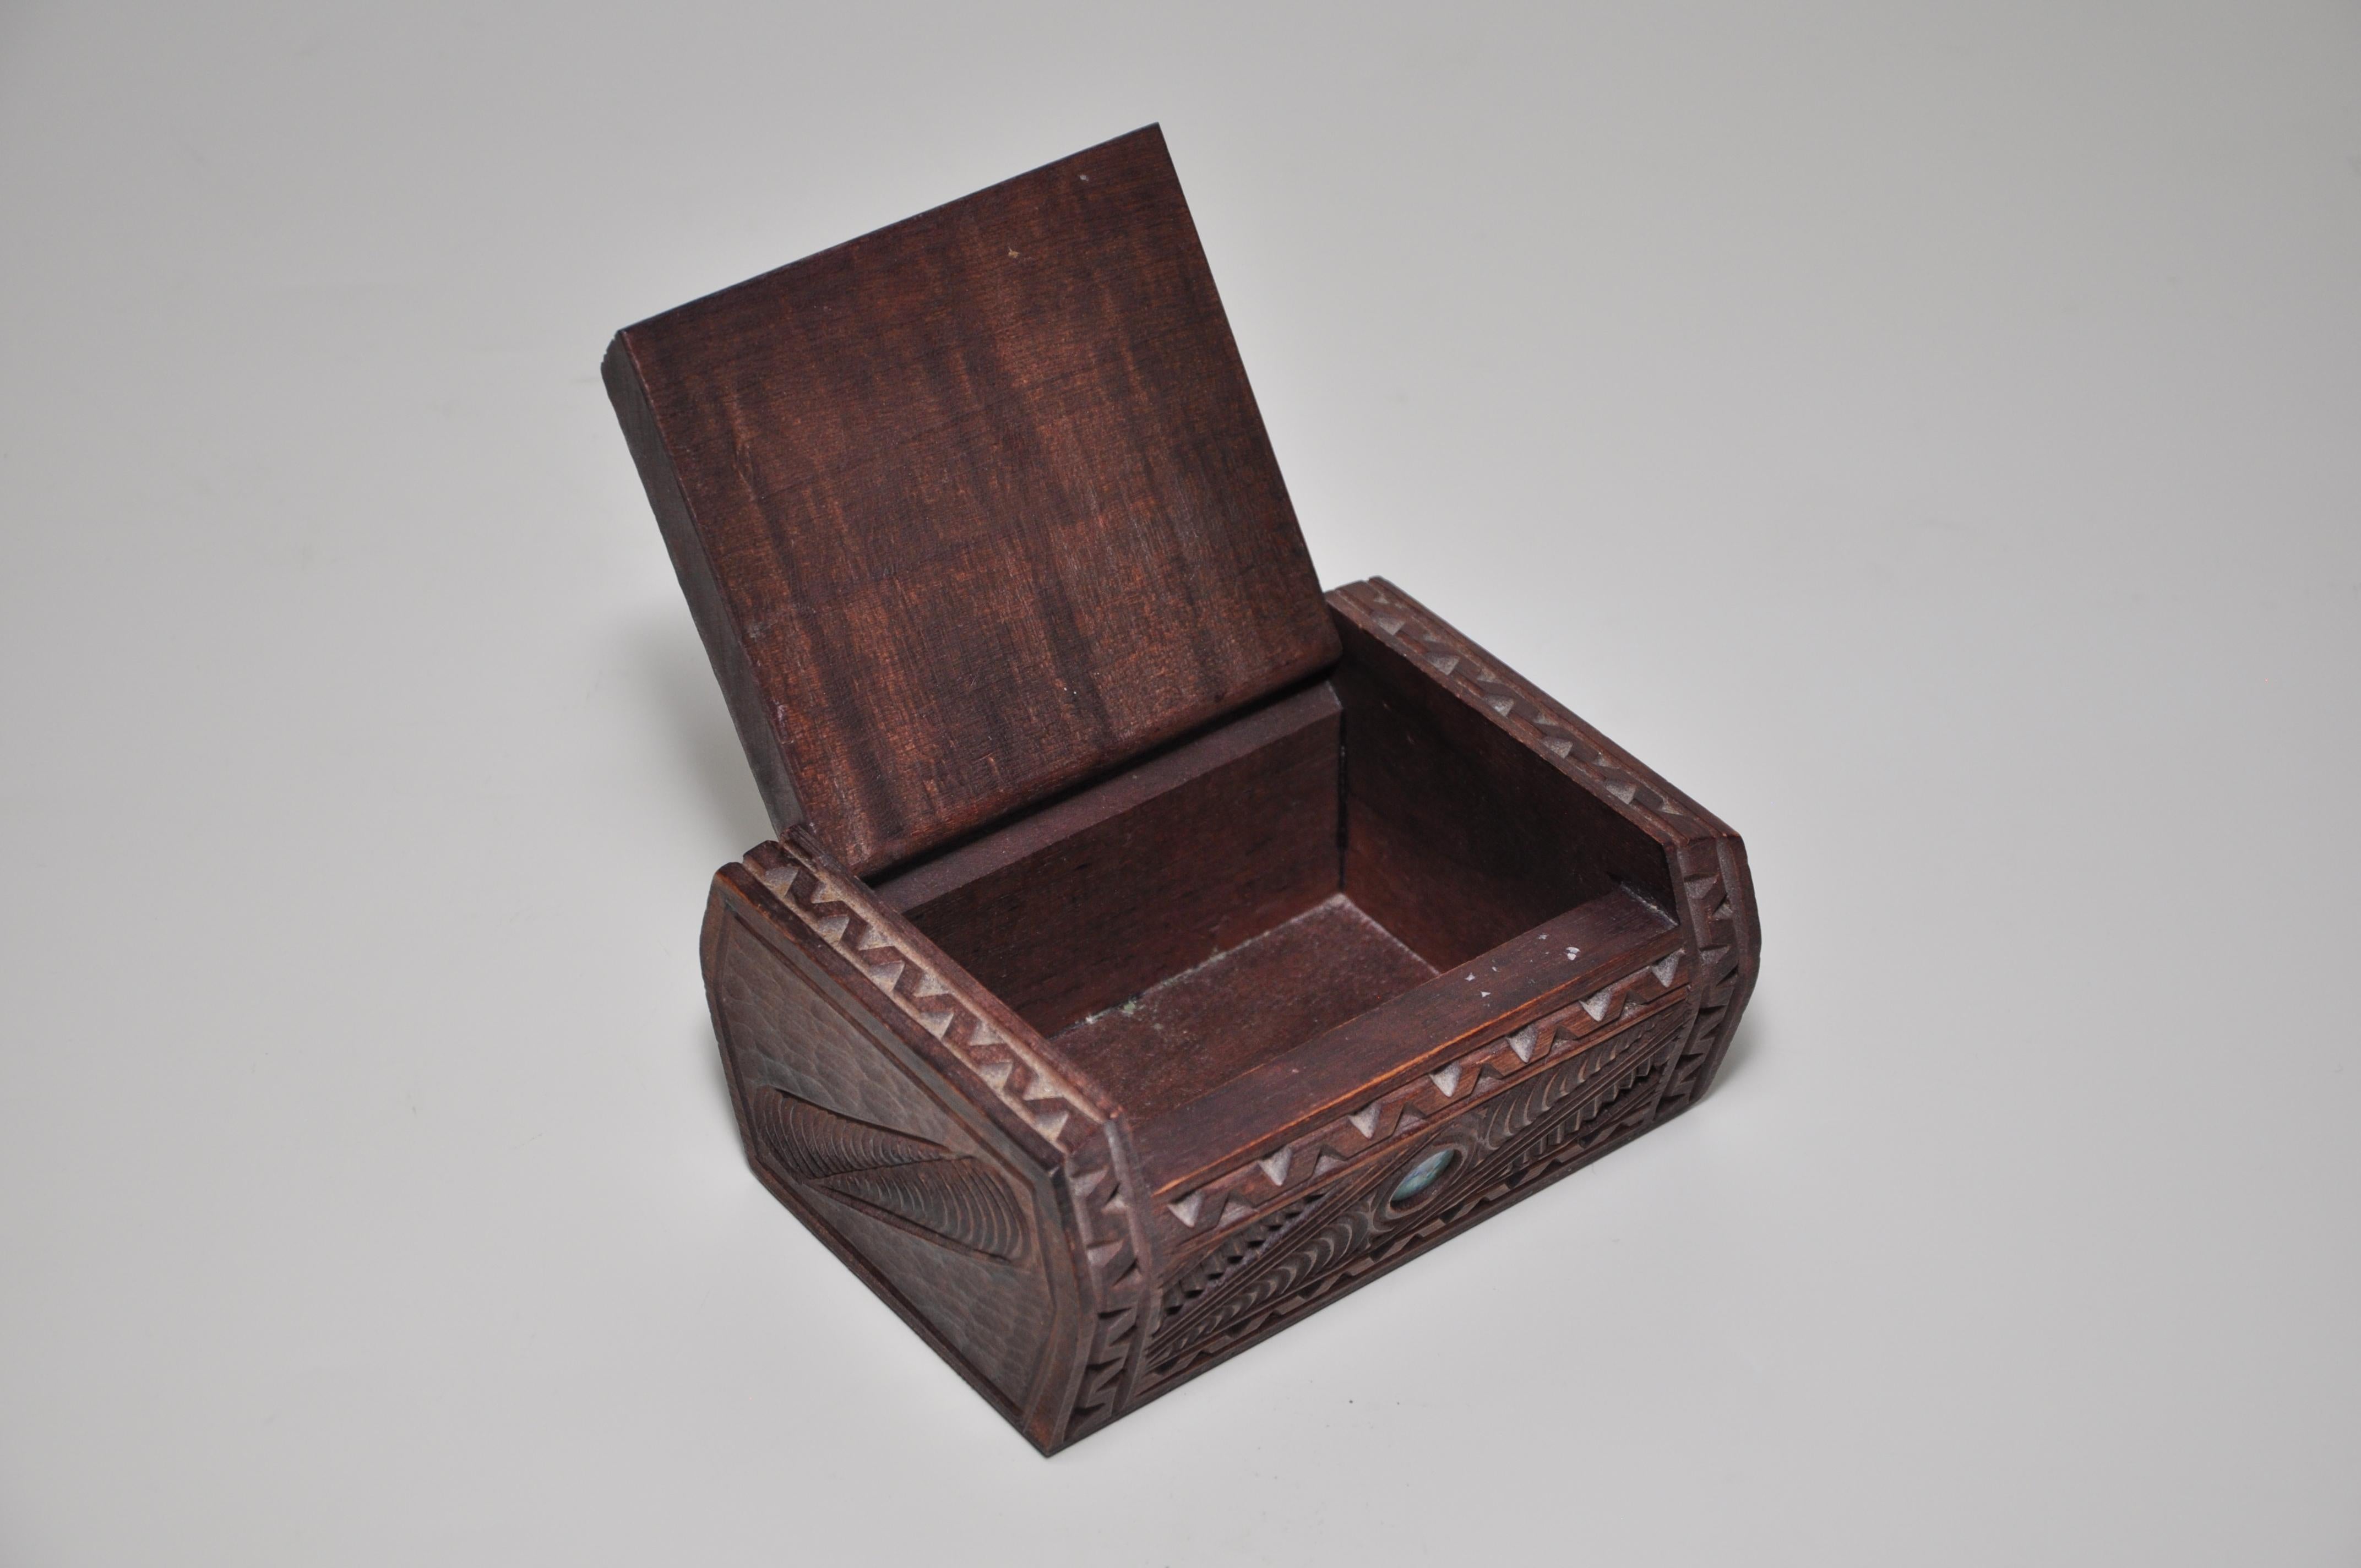 Vintage hand carved Shell Eyes Wooden Box 

A vintage hand carved and inlaid dark wooden trinket or jewelry box decorated with a Maori tribal face and inlaid paua shell ‘eyes’ on the pin-hinged lid, with other incised motifs to the sides. This is